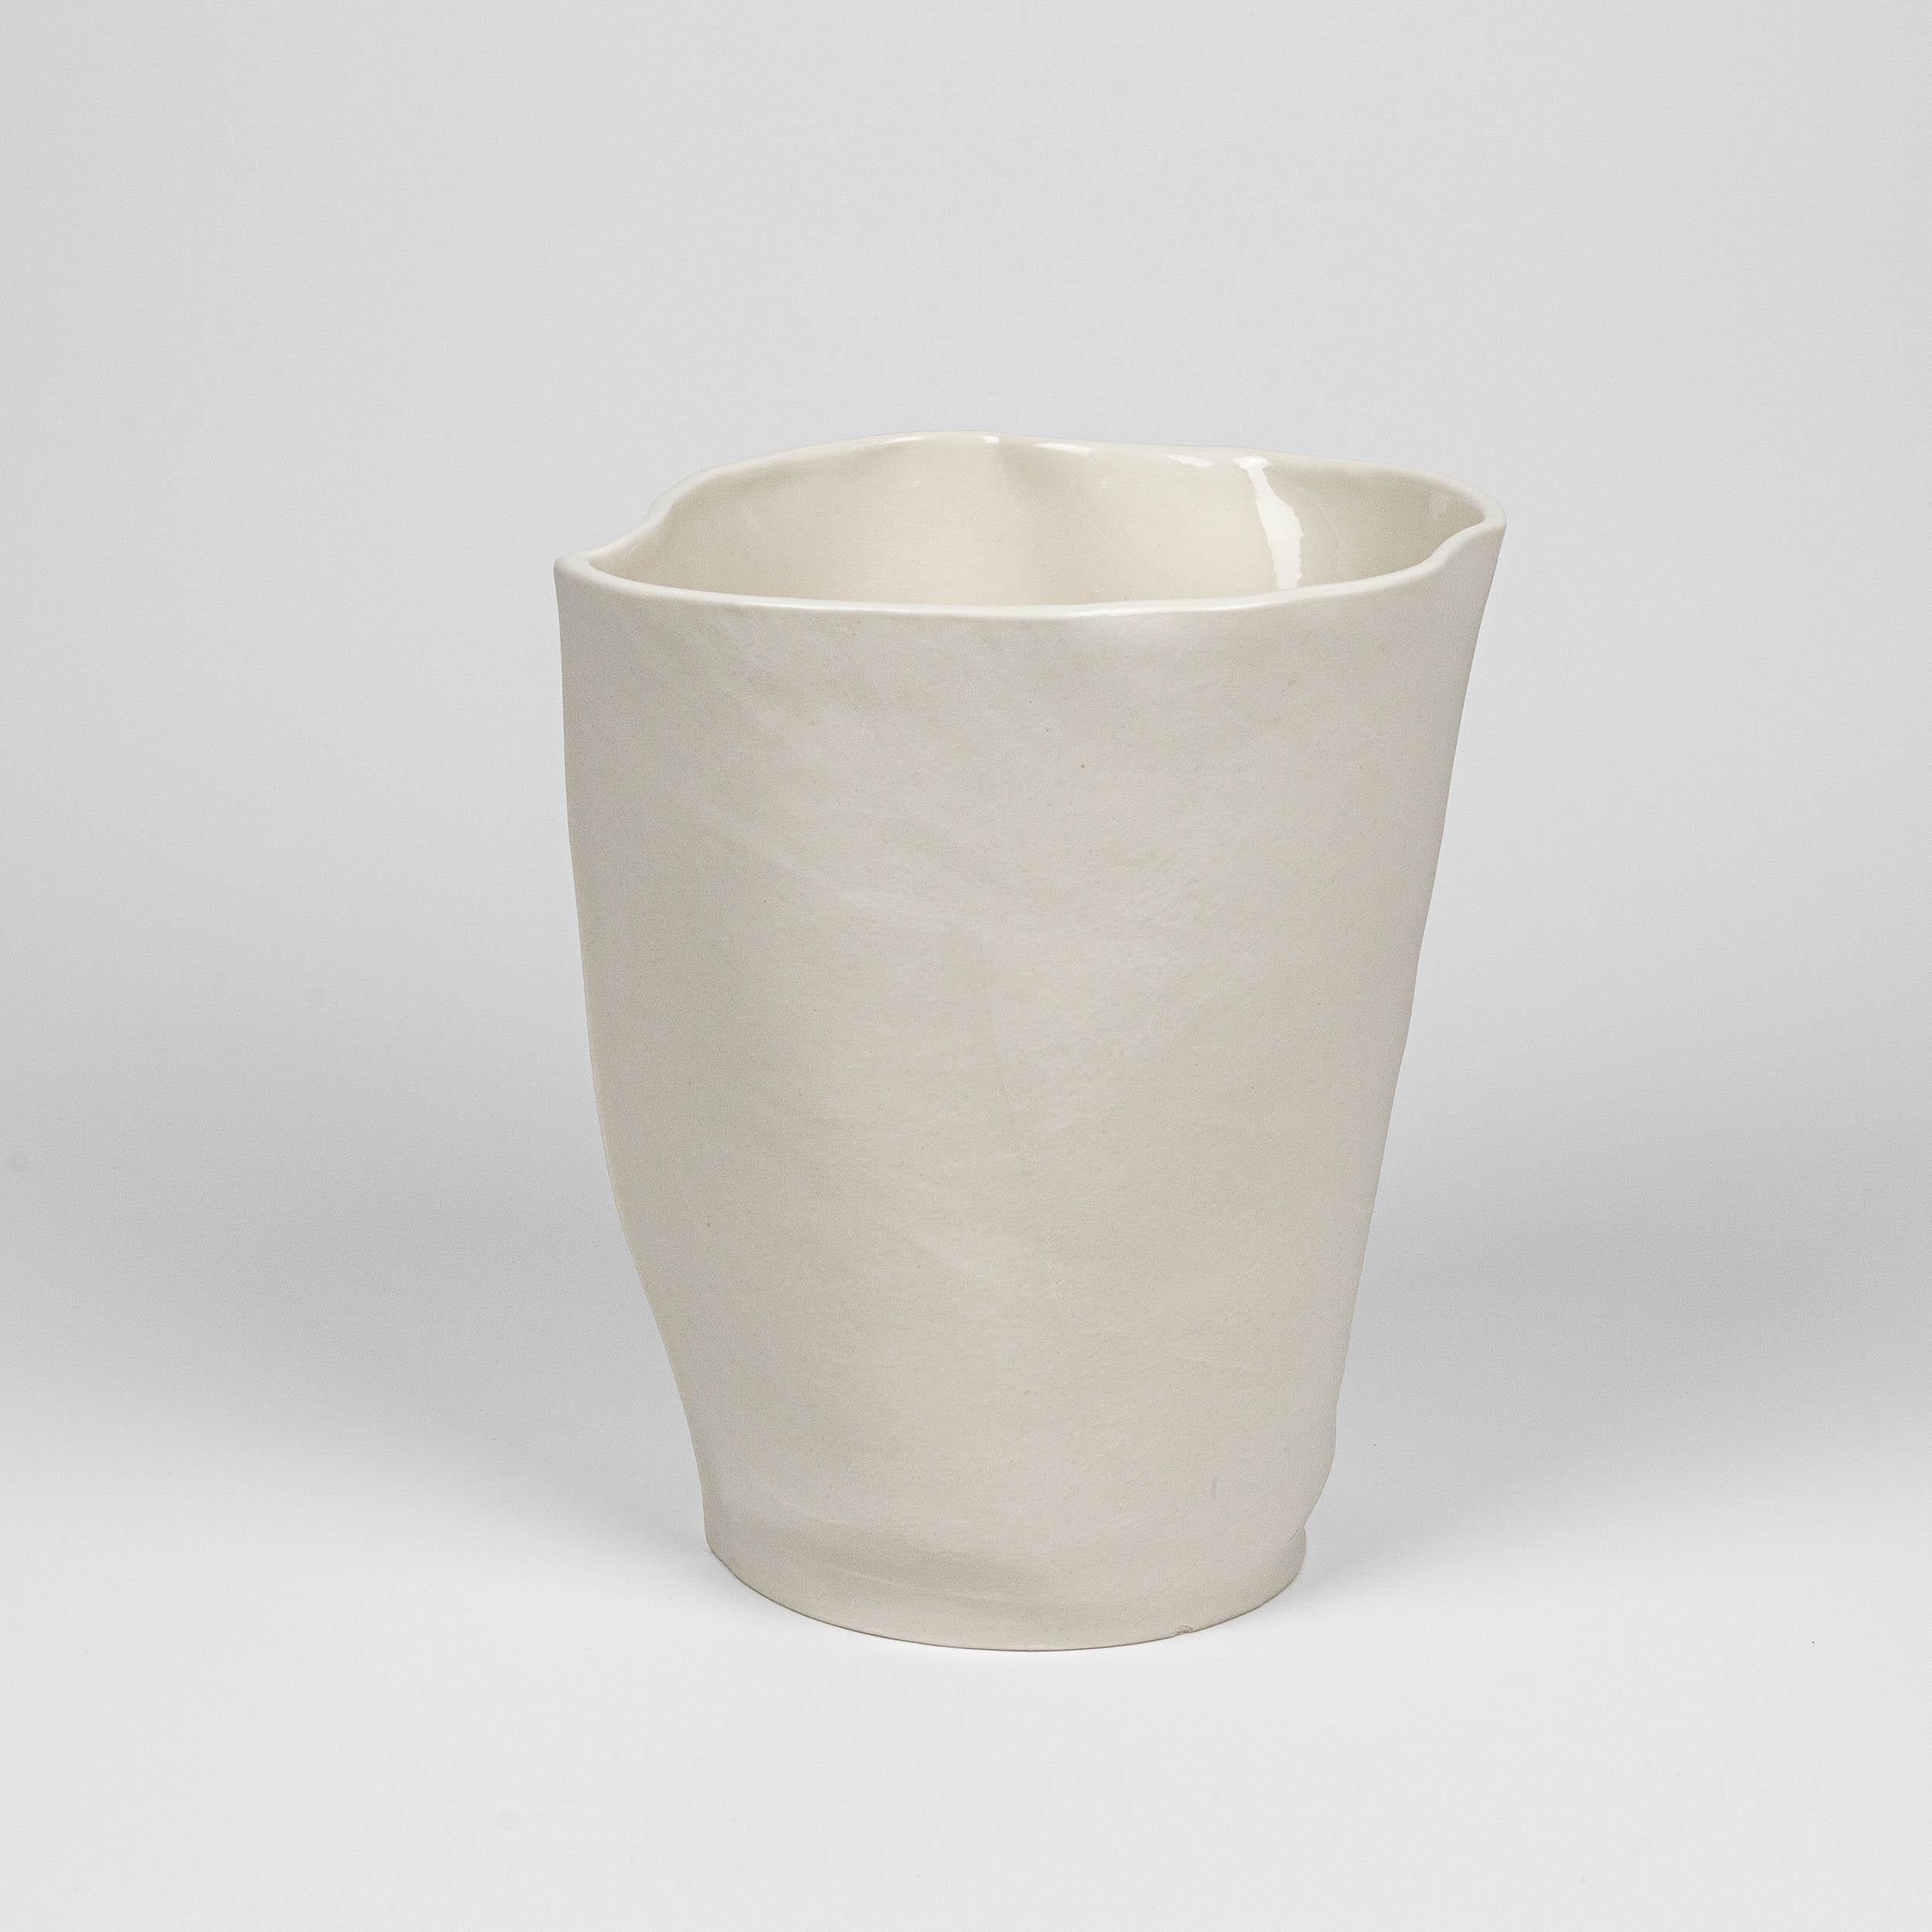 A porcelain vessel with an fabric-like form and leather texture, made by casting liquid porcelain in sewn leather molds. Clear glaze applied on interior surface. As a result of the production process each vase is one-of-a-kind. 

Dimensions
7